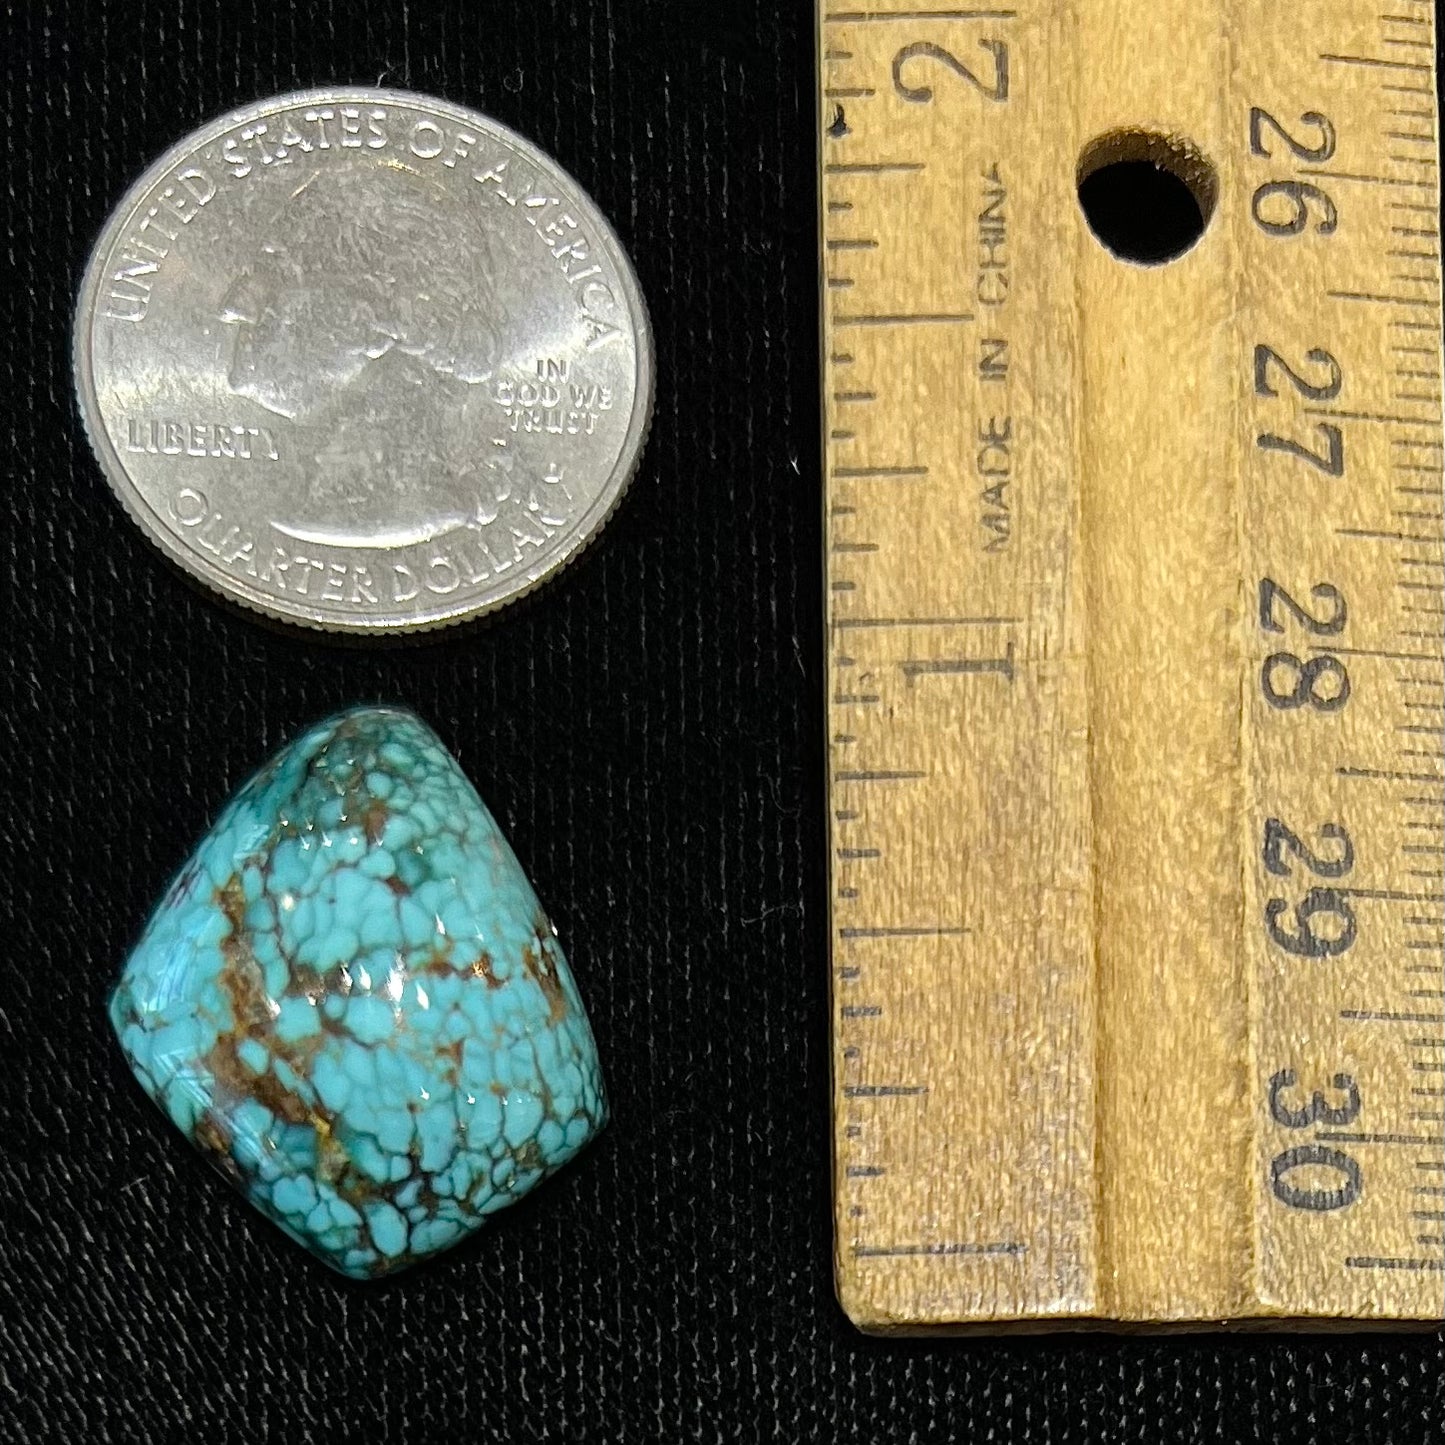 One loose freeform turquoise cabochon from the Number 8 Mine.